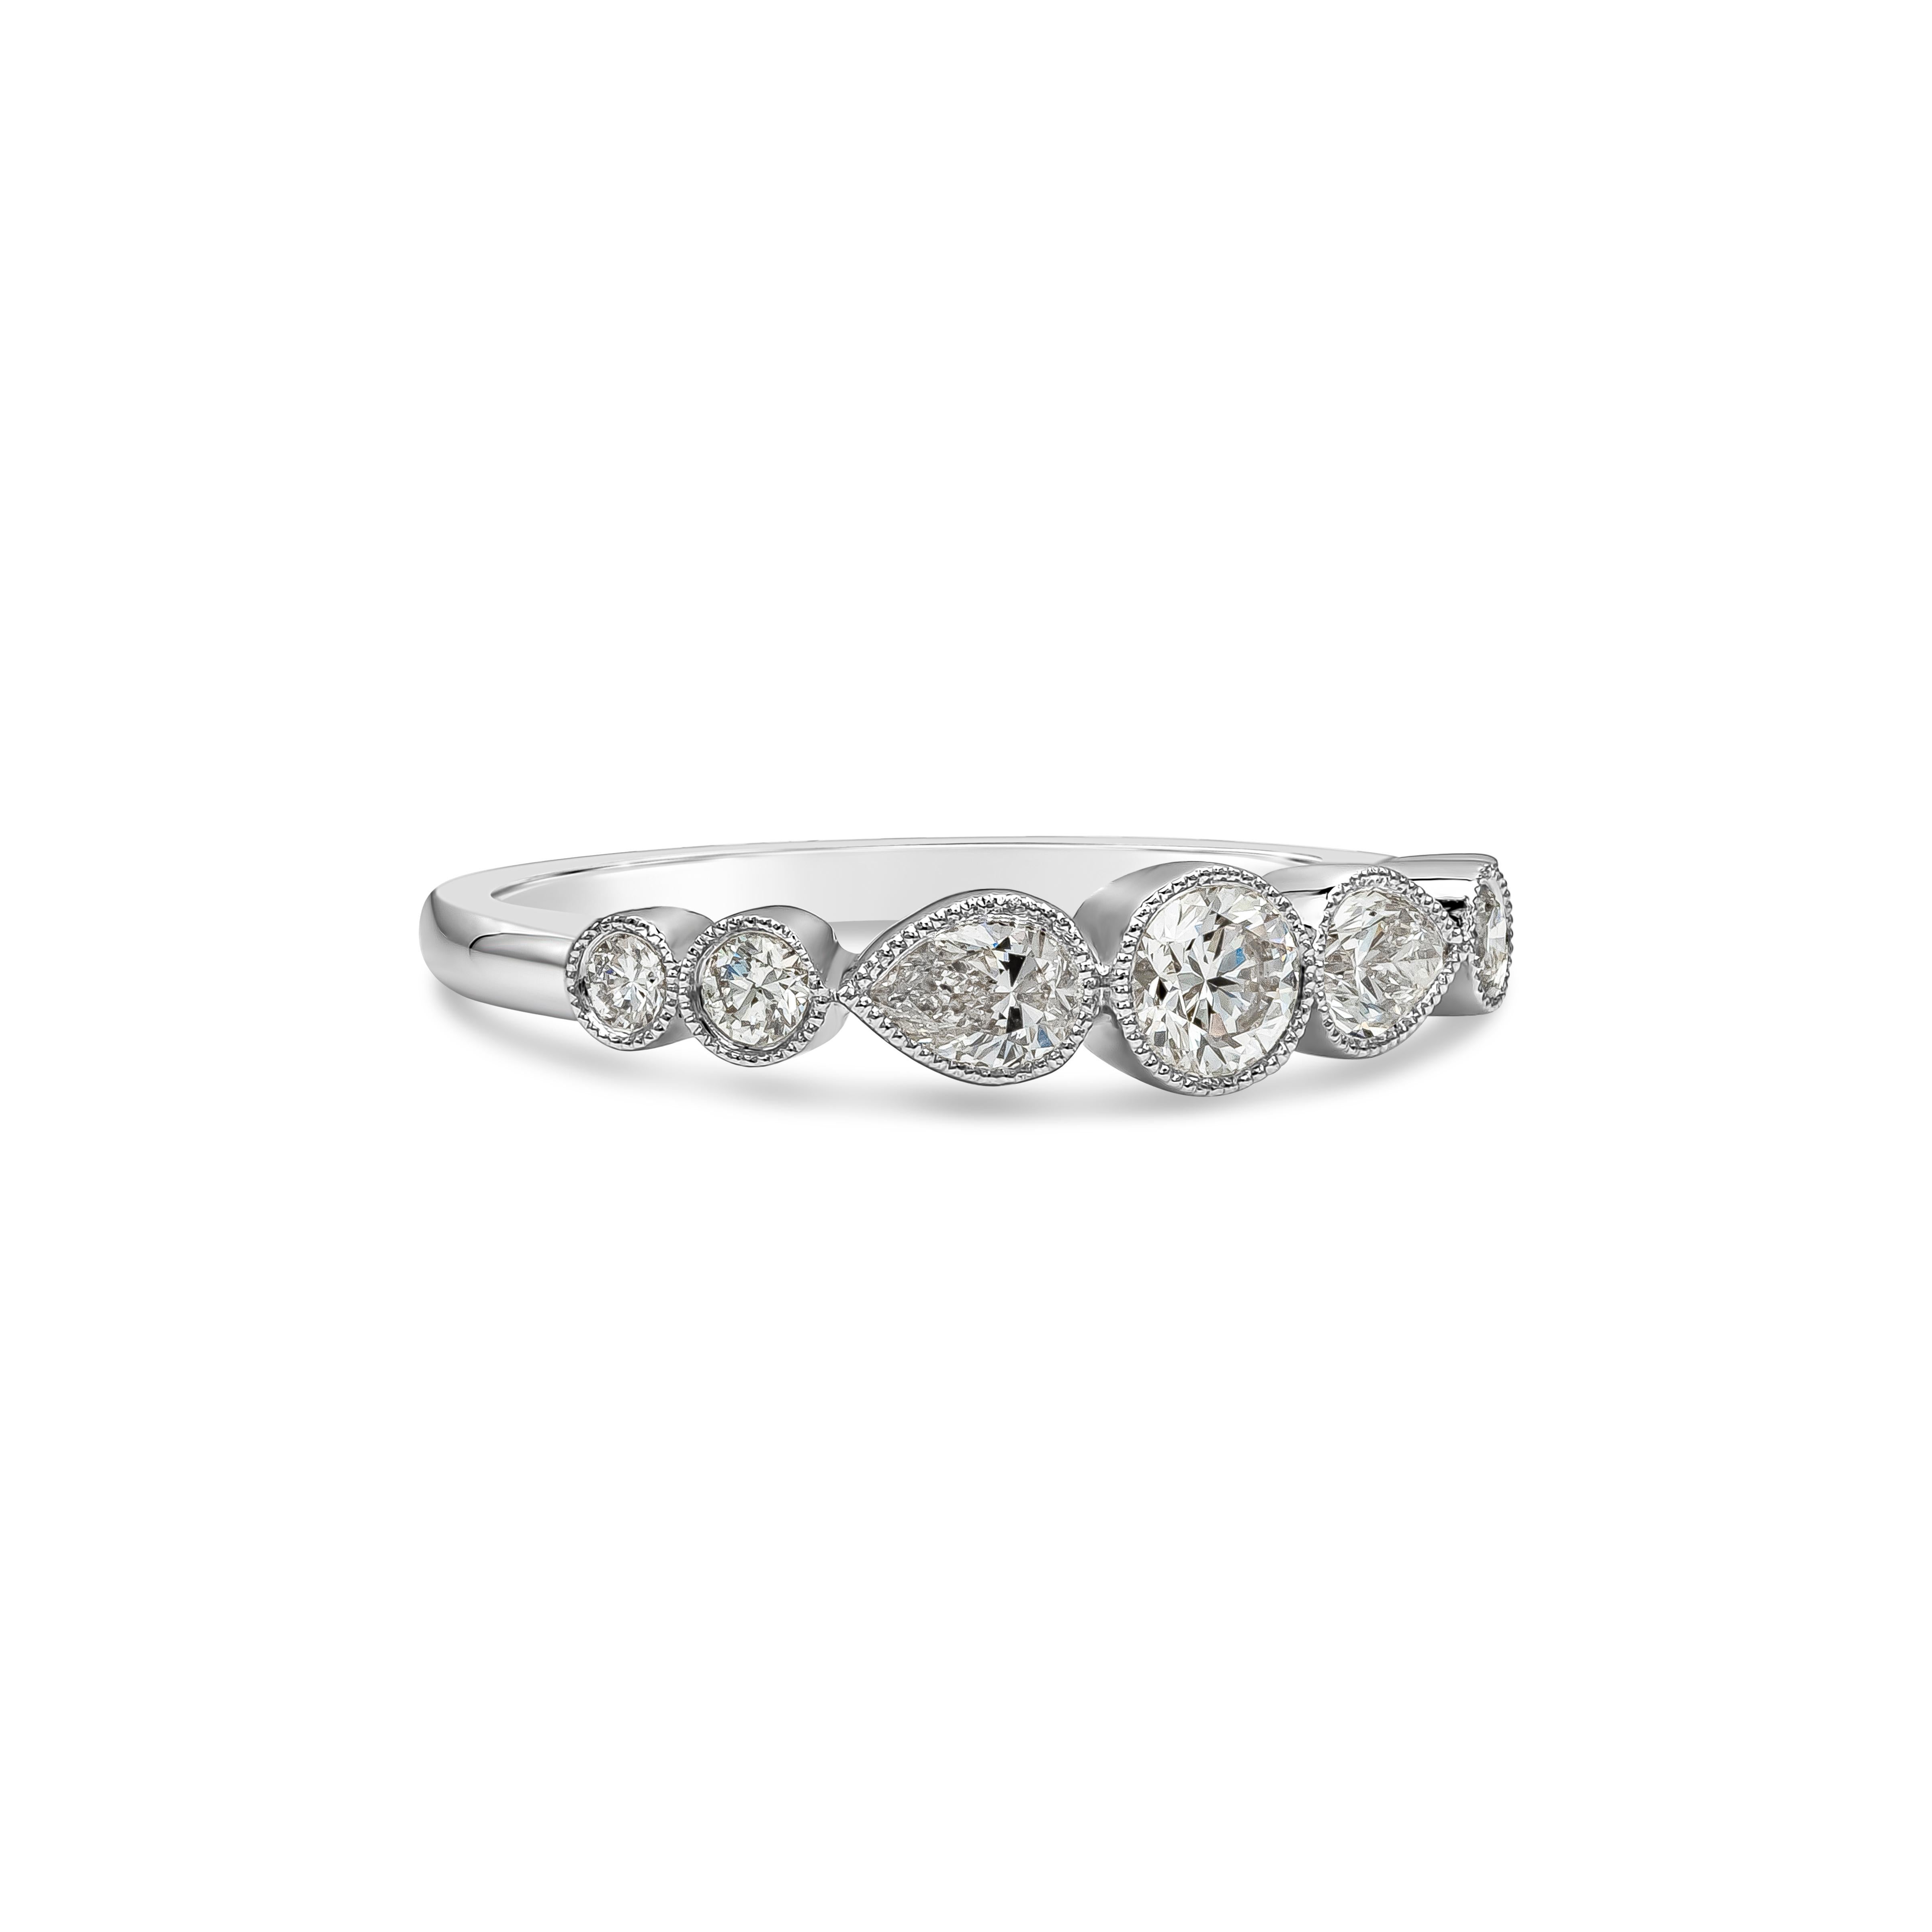 A beautiful antique-style ring showcasing round and pear shape diamonds, set in a beaded bezel, in an 18k white gold mounting. Diamonds weigh 0.62 carats total and are approximately G color, SI1 clarity.

Roman Malakov is a custom house,